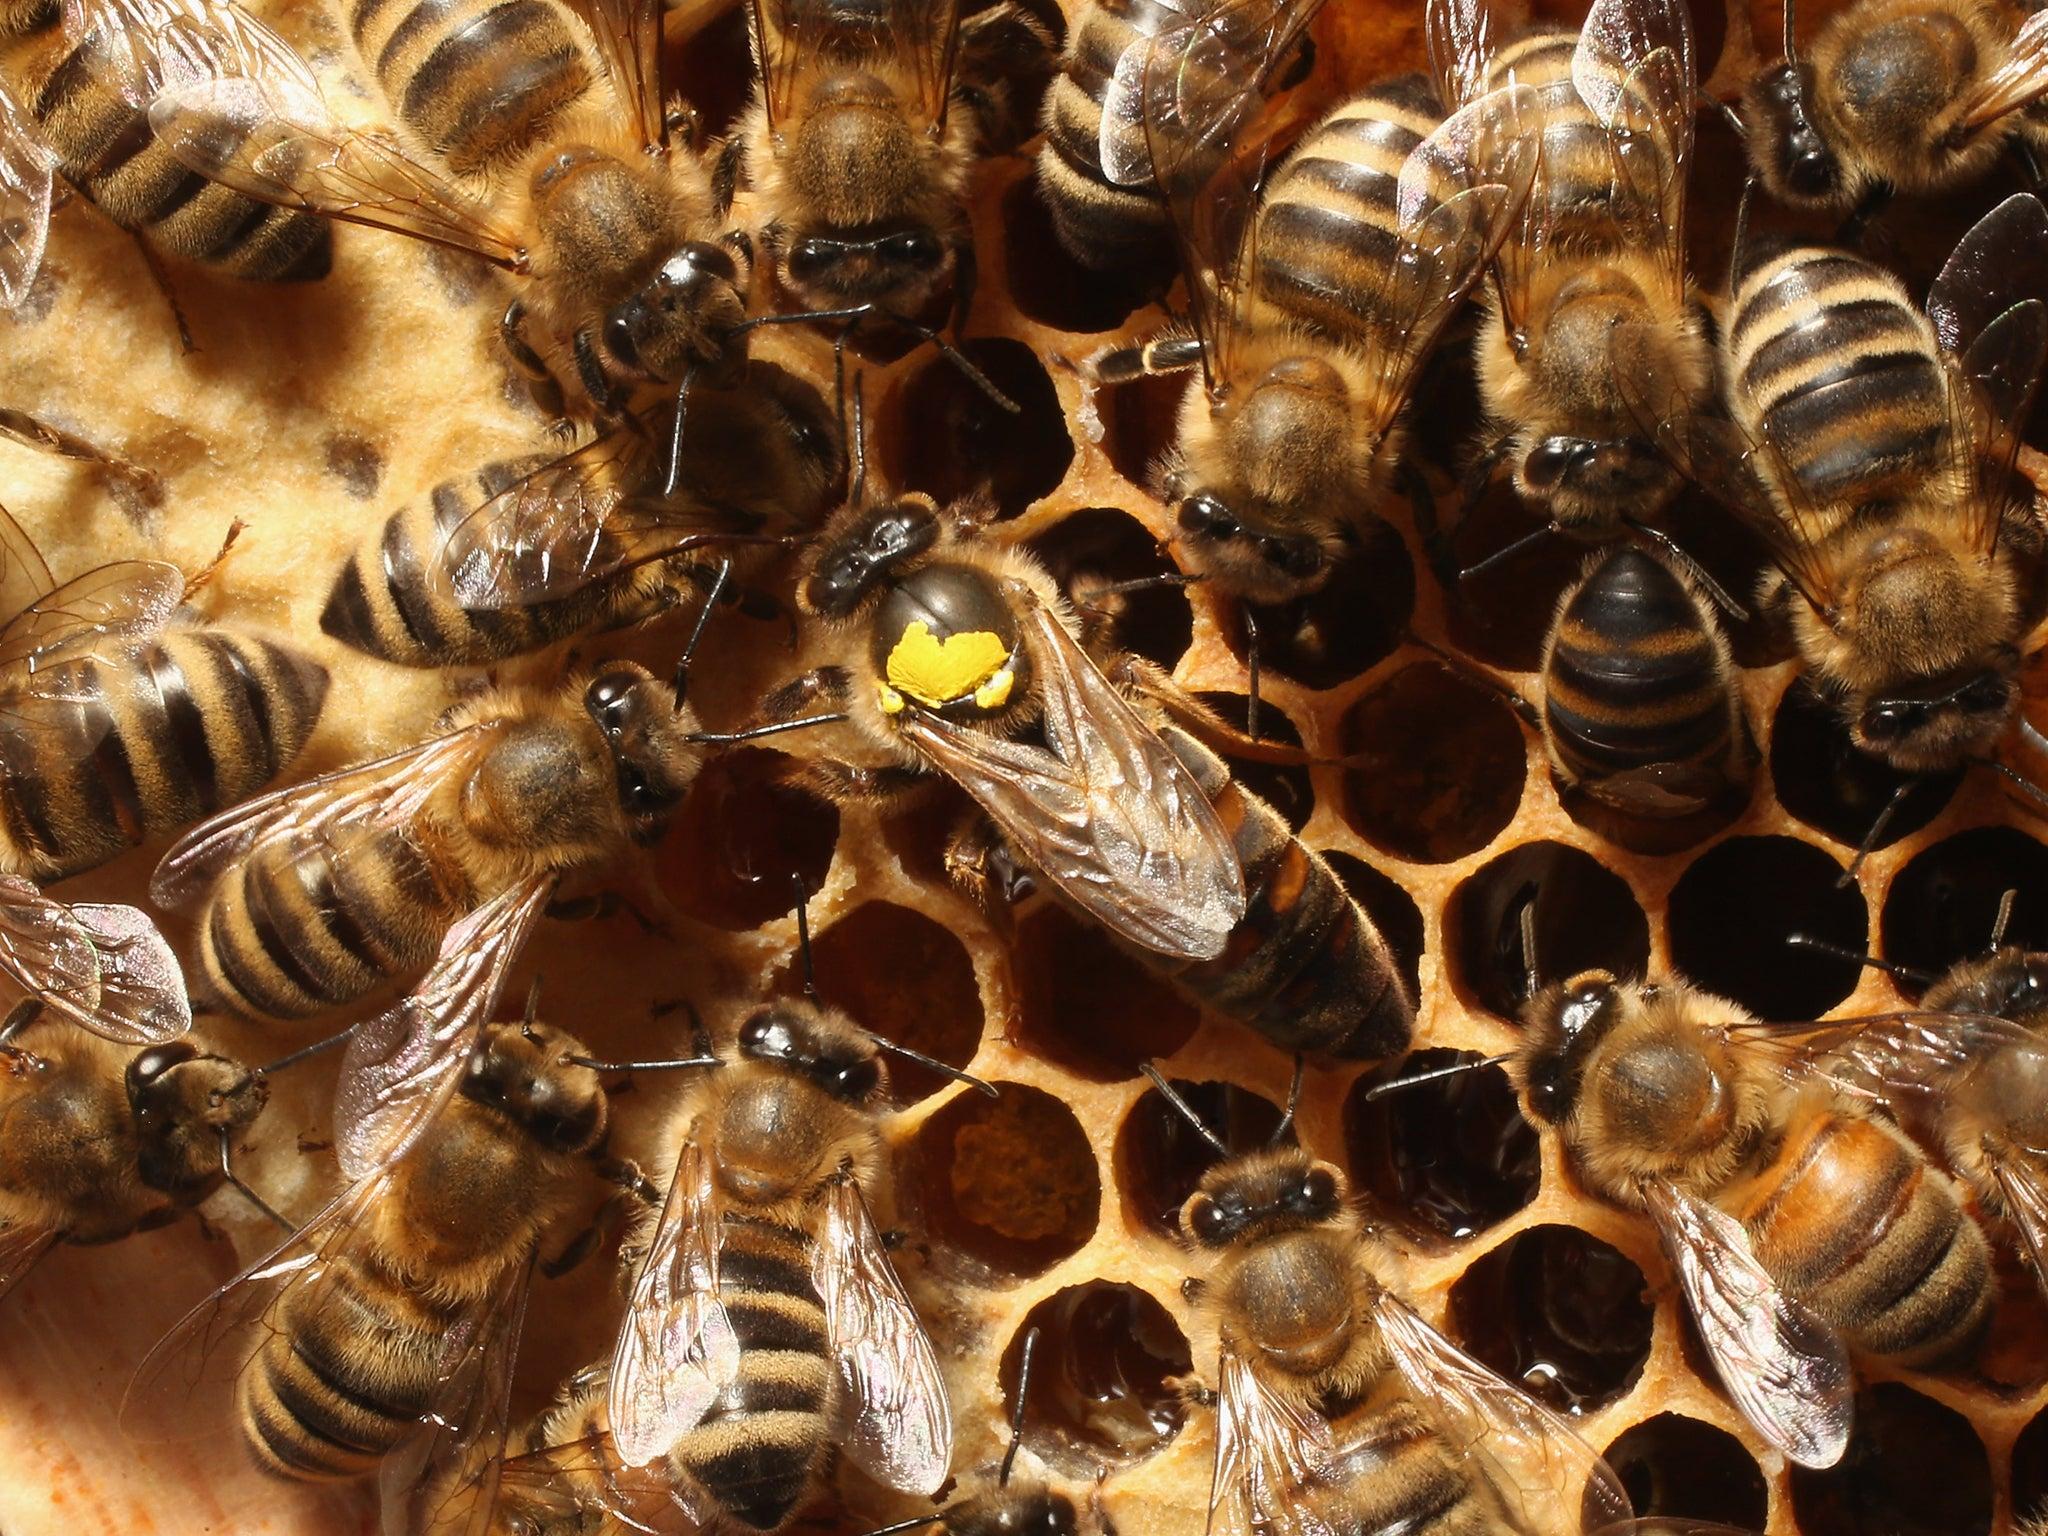 Science news in brief: From bee psychology to the strange